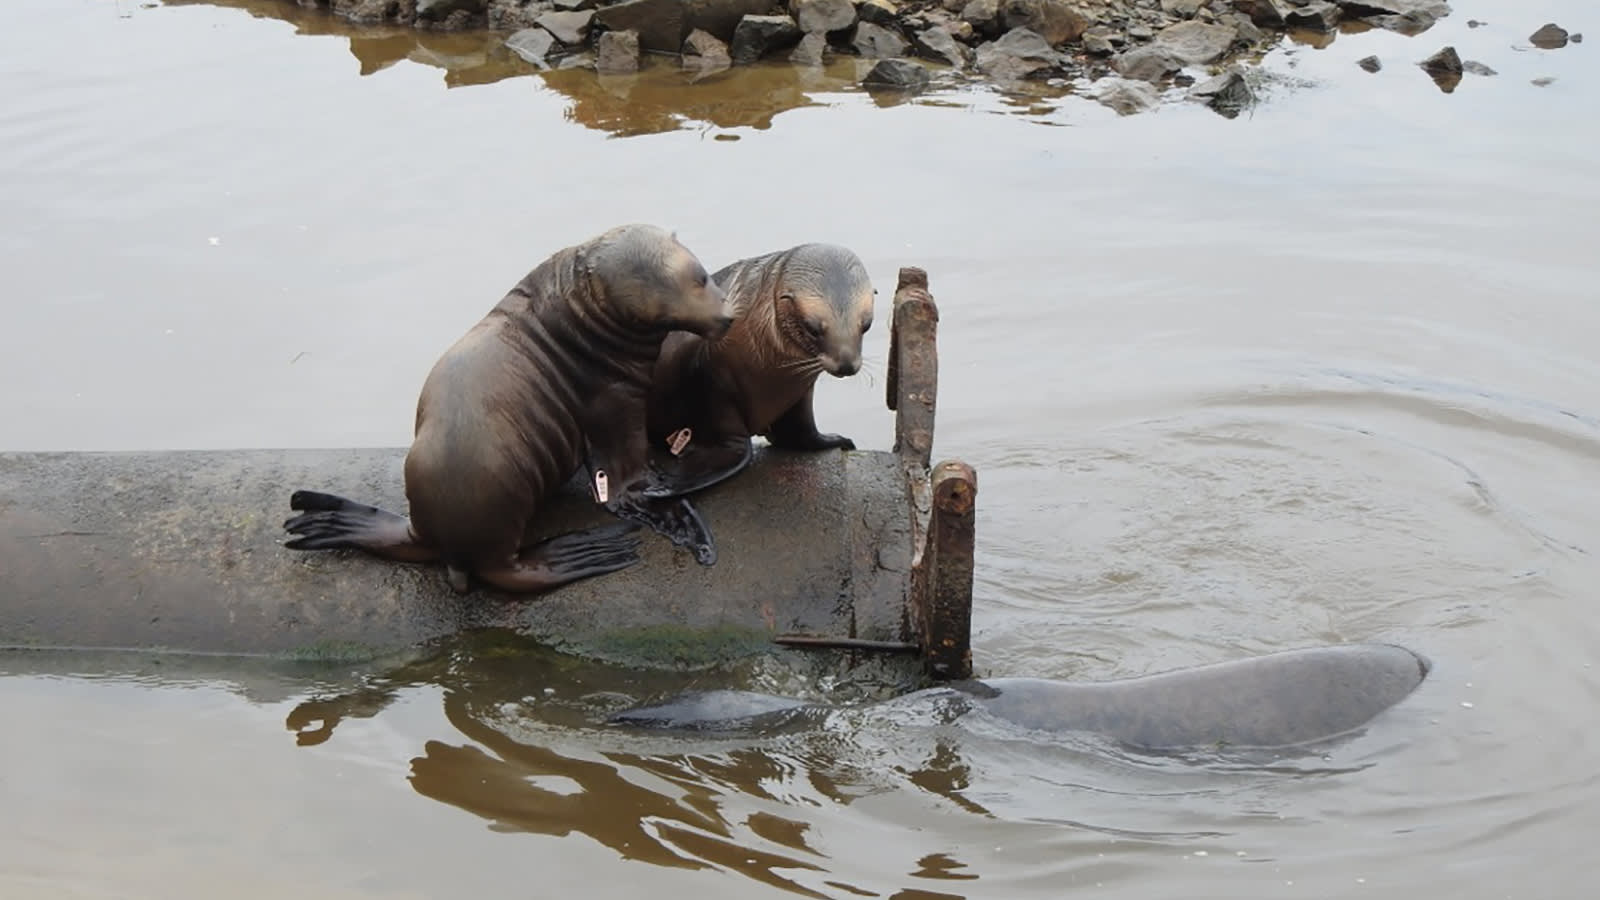 In New Zealand, endangered sea lions